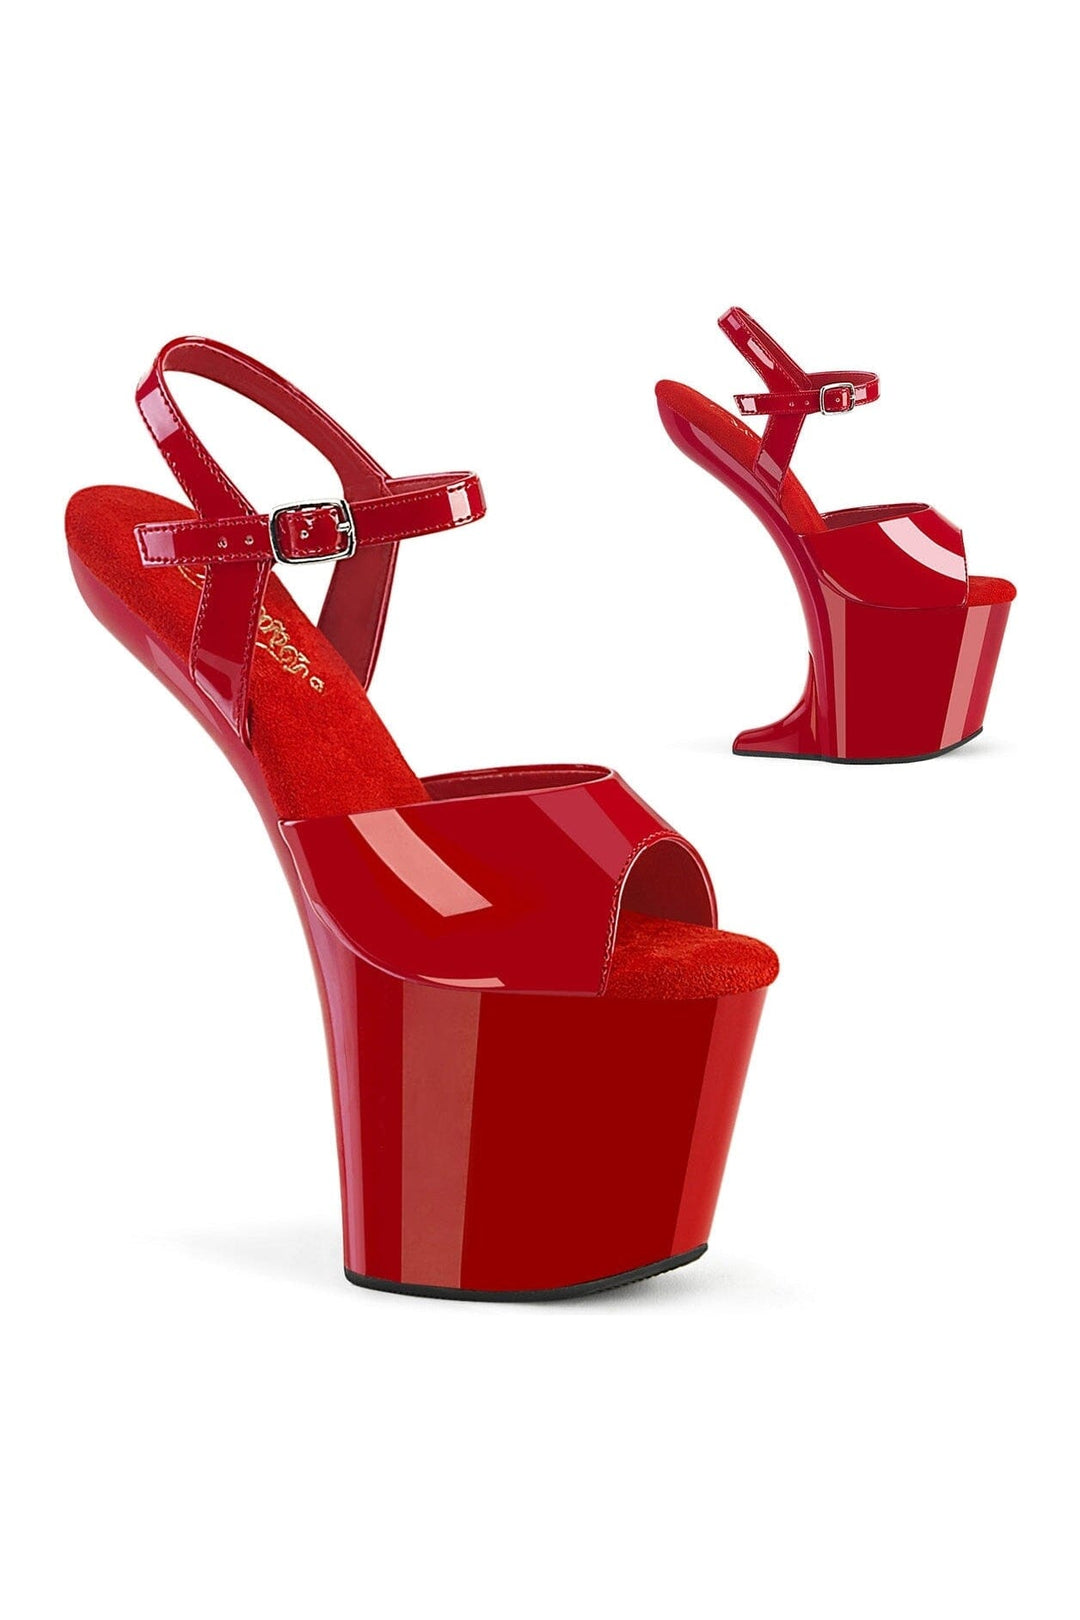 CRAZE-809 Red Patent Sandal-Sandals-Pleaser-Red-10-Patent-SEXYSHOES.COM